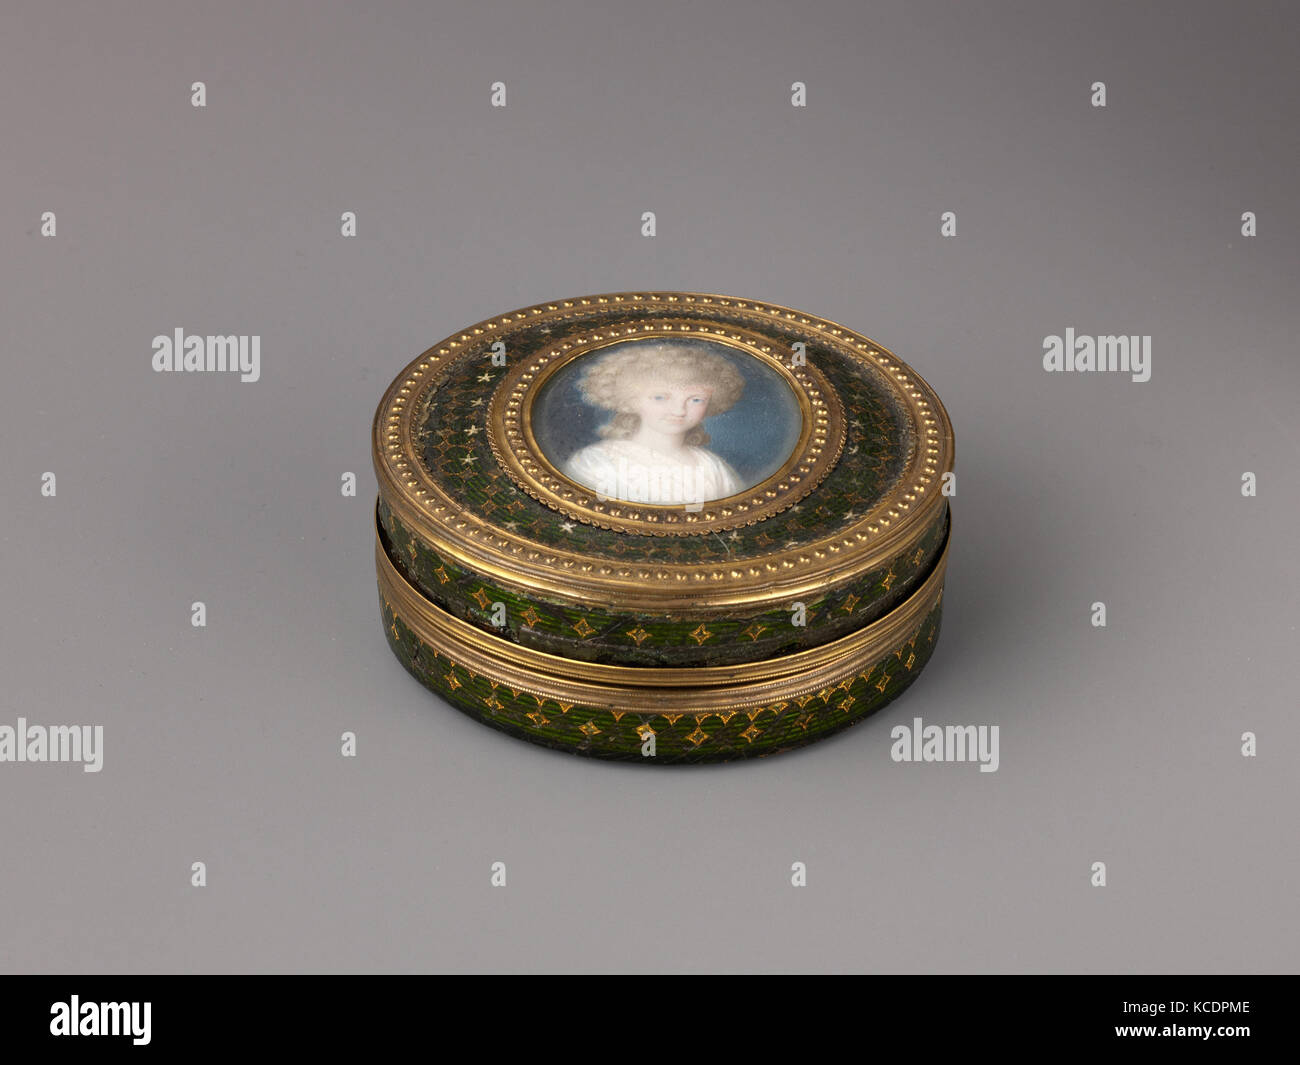 Snuffbox with a Portrait of a Woman, ca. 1785, French, Papier-mâchè with horn veneer, gilt-copper alloy, vellum, tortoiseshell Stock Photo